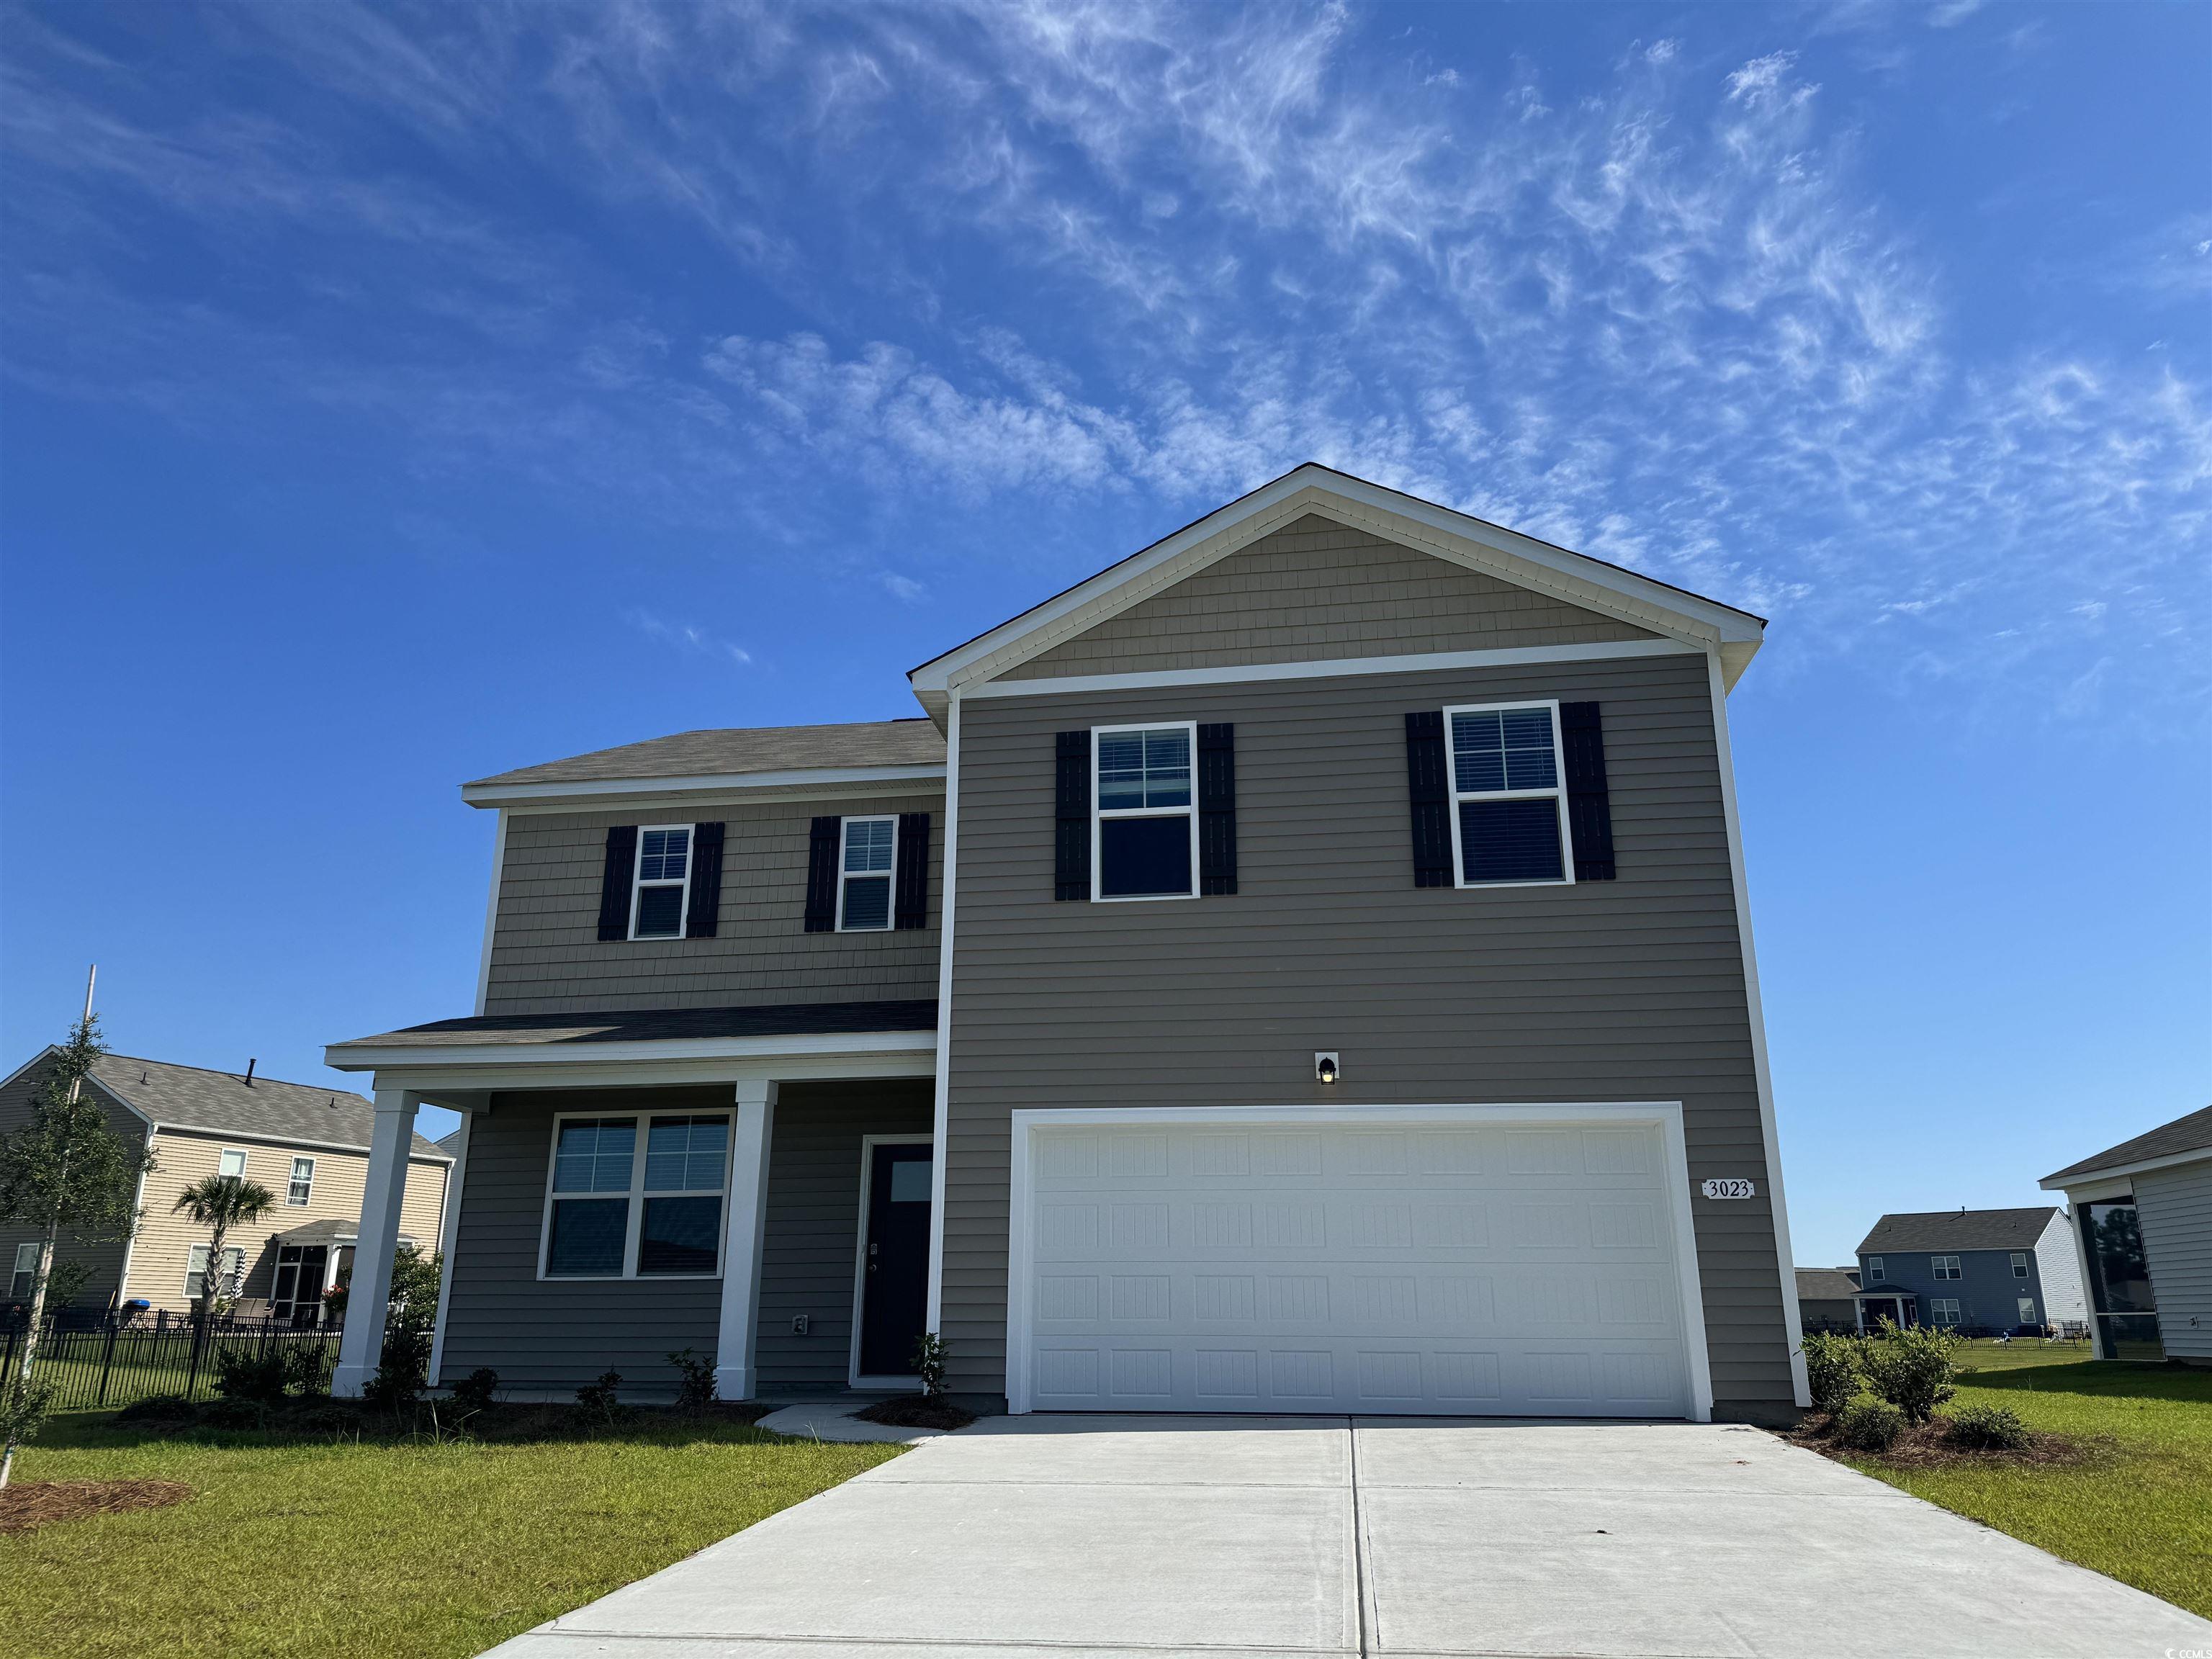 the next phase of oyster bluff is now open! natural gas community just minutes away from shopping, dining, and the beach. this spacious two-story home has everything you are looking for! with a large, open concept great room and kitchen you will have plenty of room to entertain. large island with breakfast bar, stainless whirlpool appliances, and a walk-in pantry. the first floor also features a great size flex room which could be used as a home office, formal dining room, or den. your primary bedroom suite awaits upstairs with huge walk-in closet and private bath with double sinks, 5 ft. shower, and linen closet. tankless gas water heater and a 2-car garage with garage door opener also included. it gets better- this is america's smart home! ask an agent today about our industry leading smart home technology package that is included in each of our new homes. *photos are of a similar galen home. (home and community information, including pricing, included features, terms, availability and amenities, are subject to change prior to sale at any time without notice or obligation. square footages are approximate. pictures, photographs, colors, features, and sizes are for illustration purposes only and will vary from the homes as built. equal housing opportunity builder.)